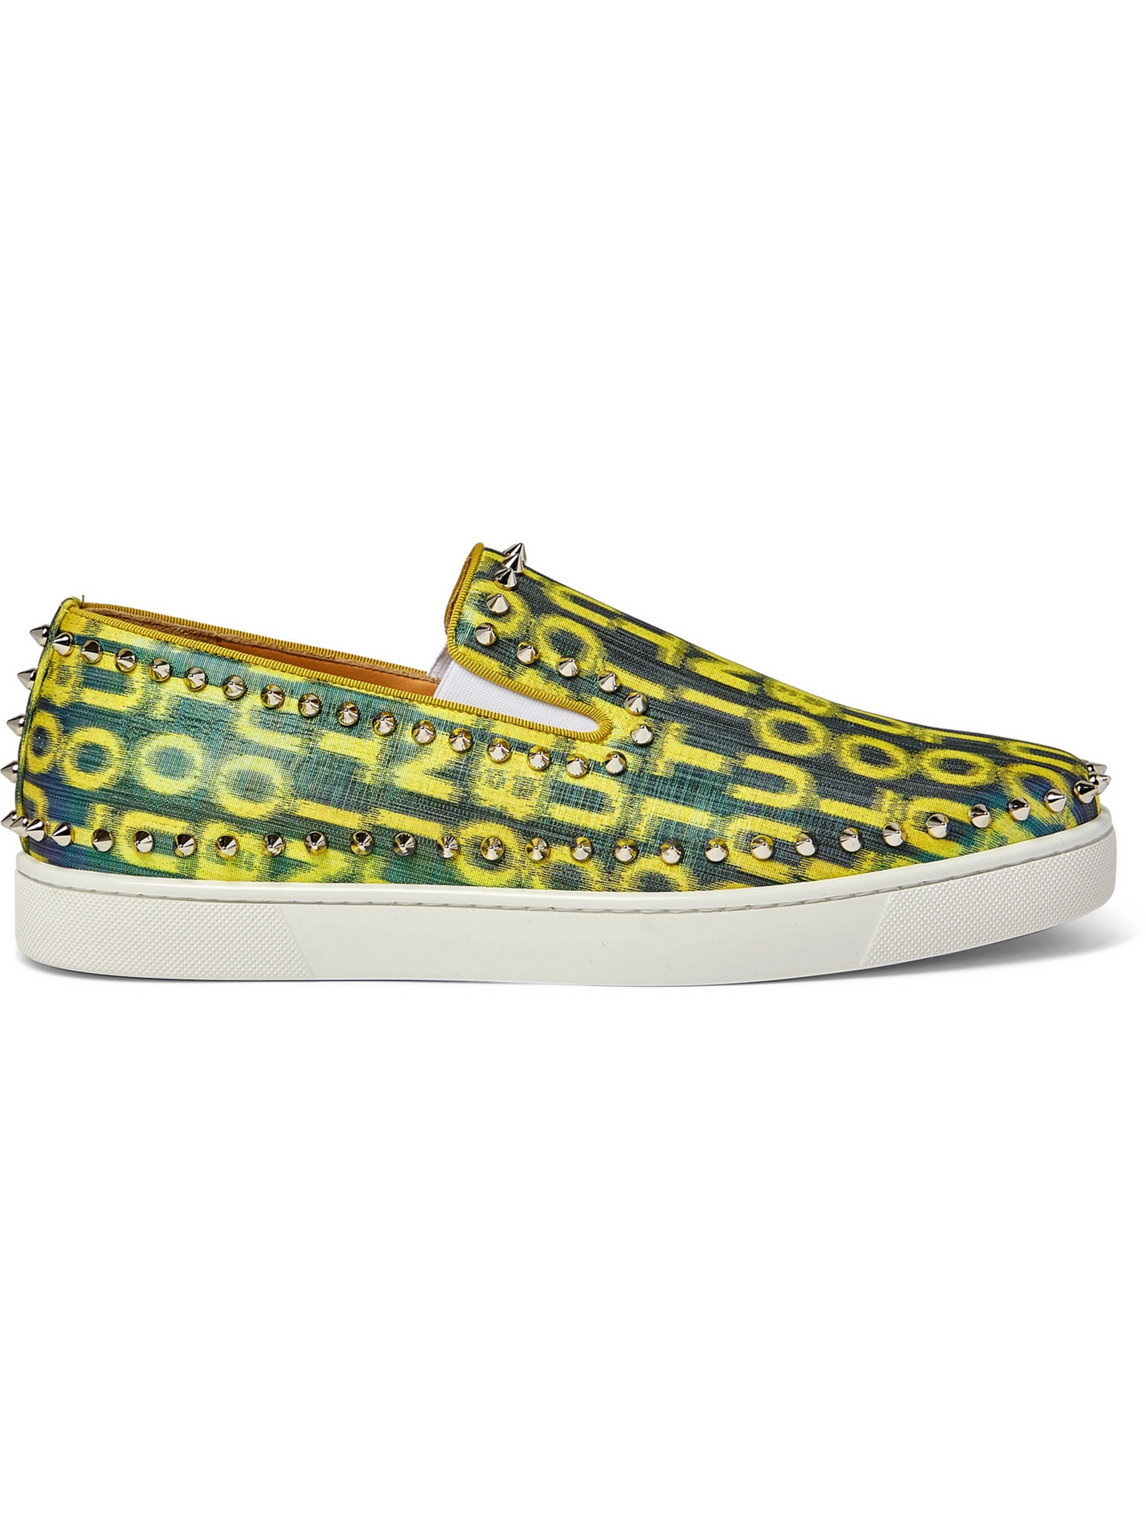 Christian Louboutin Pik Boat Spiked Glittered Logo-print Canvas Slip-on Trainers In Yellow